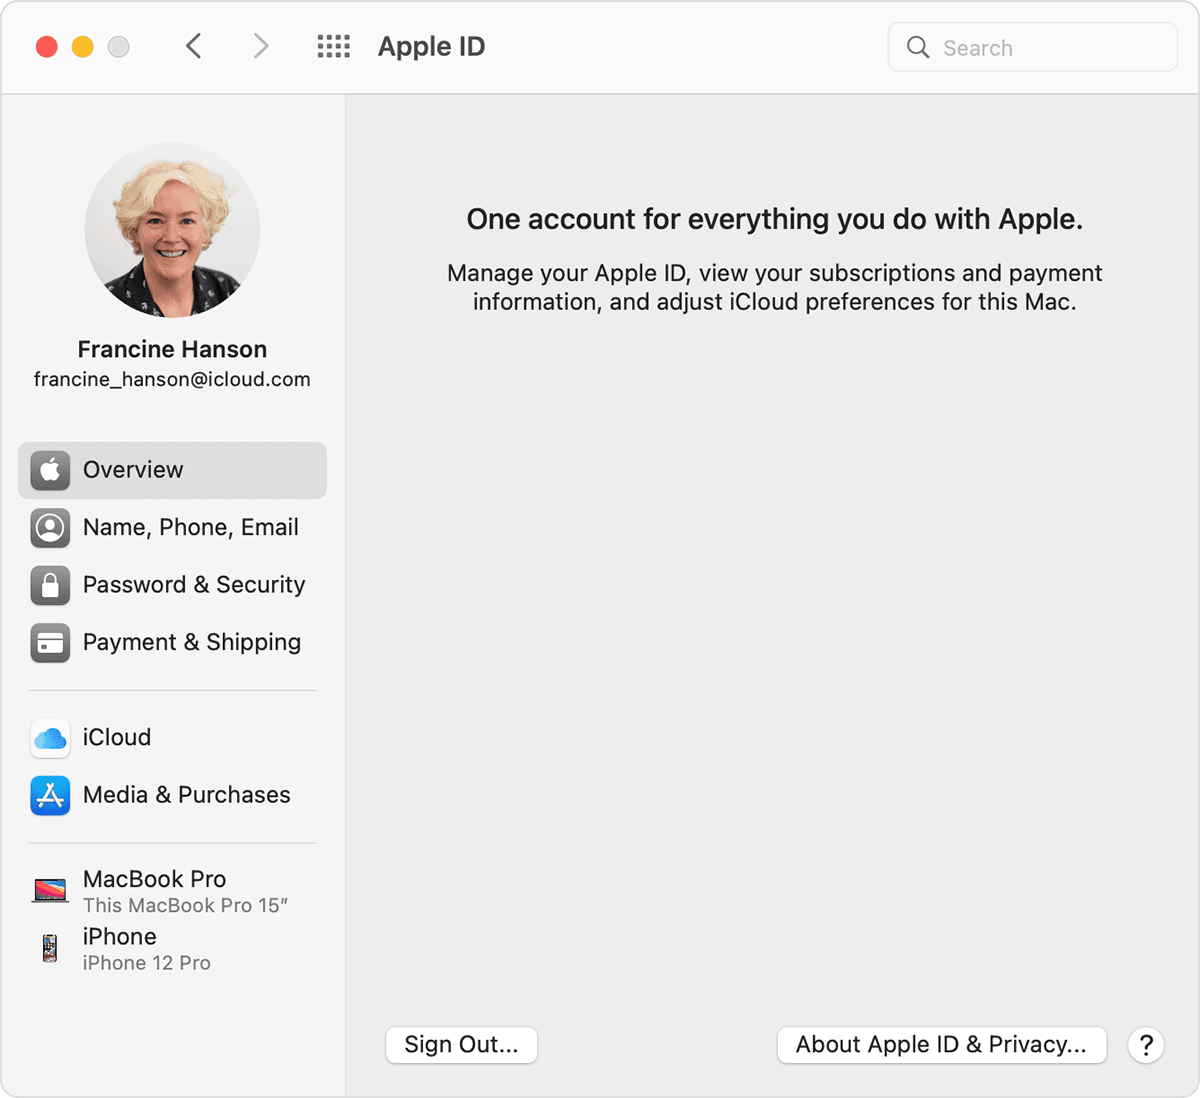 An image of the macOS System Preferences menu for Francine Hanson. The Sign Out button is towards the bottom on the righthand side.